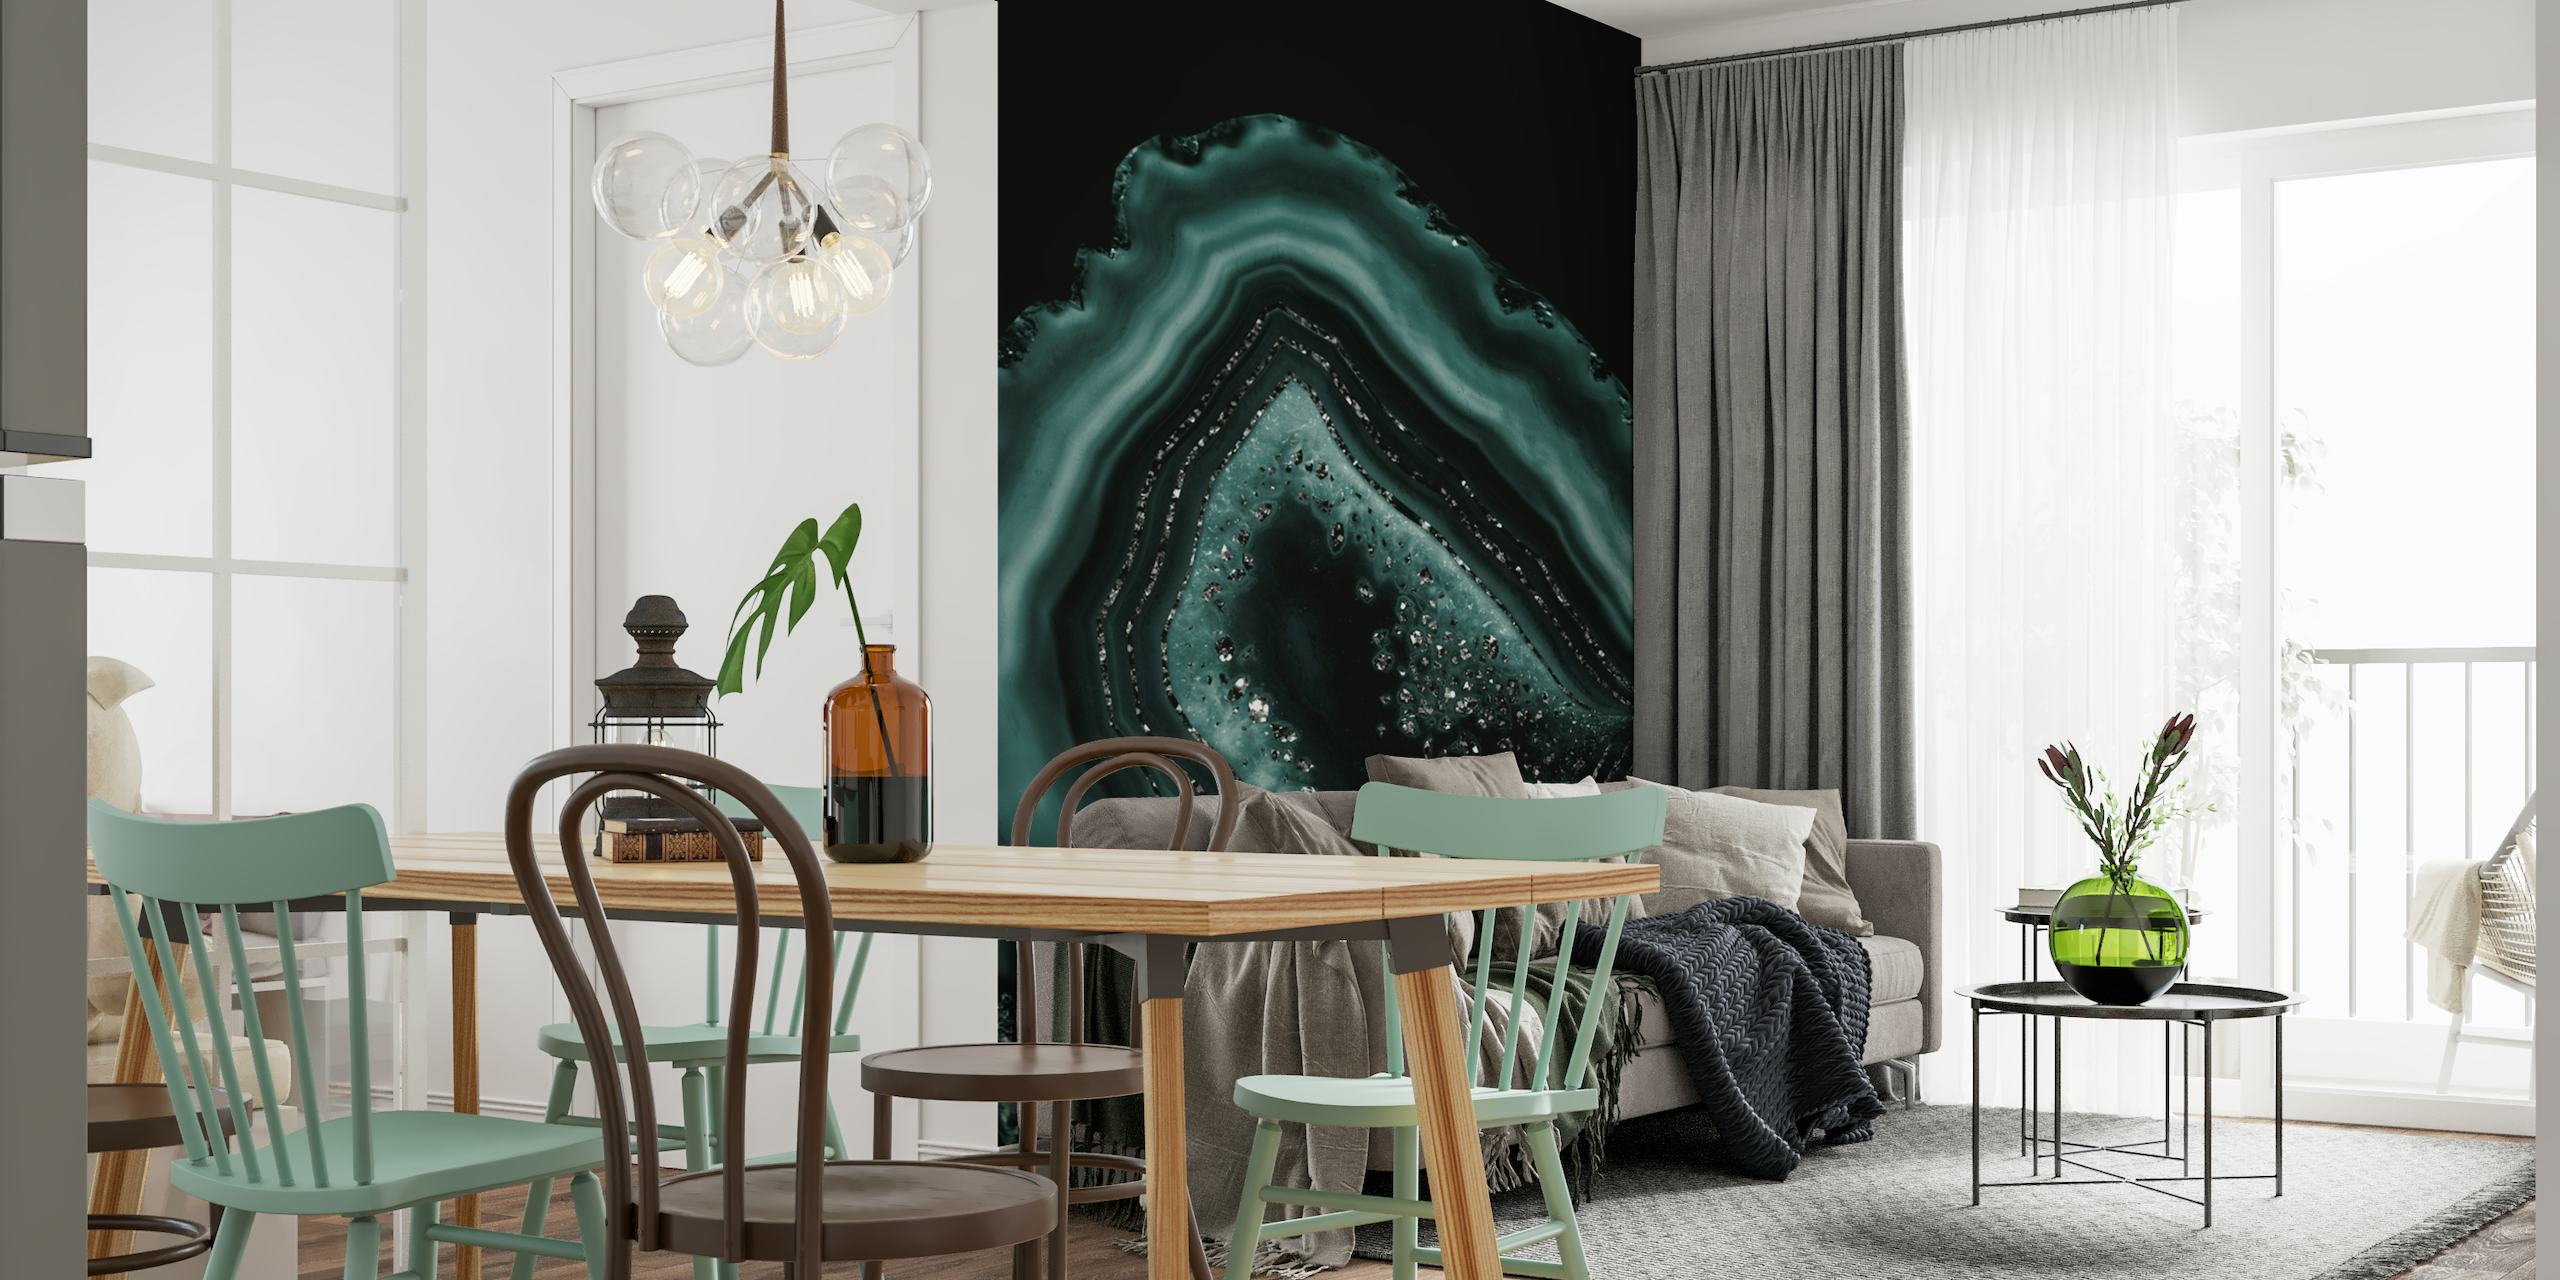 Teal and black agate pattern with glitter details wall mural